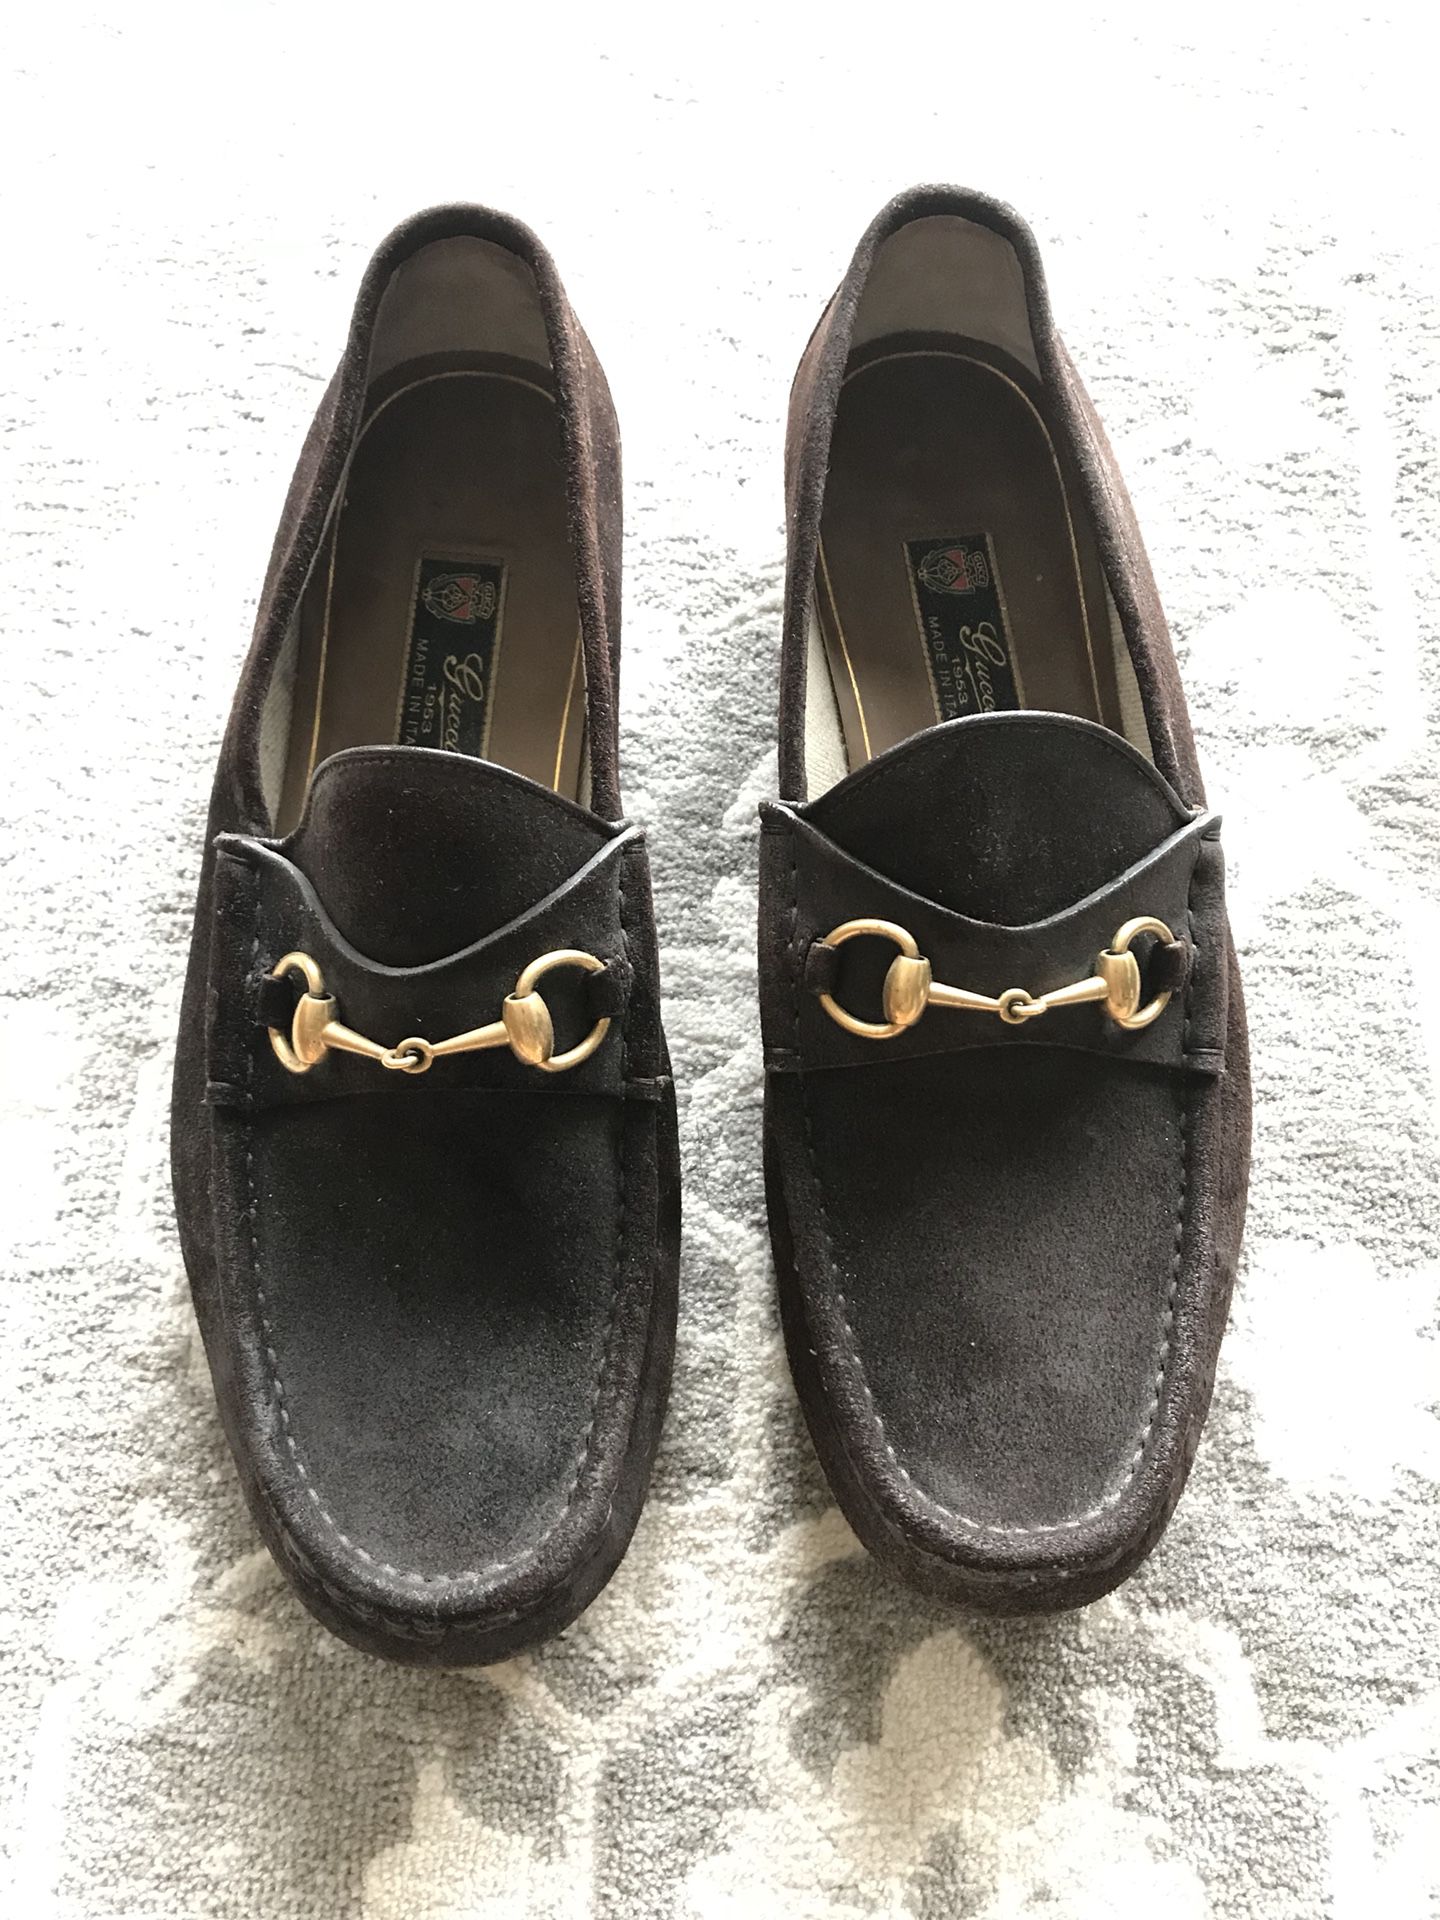 Genuine Suede Loafers (Men) for in Chicago, IL - OfferUp